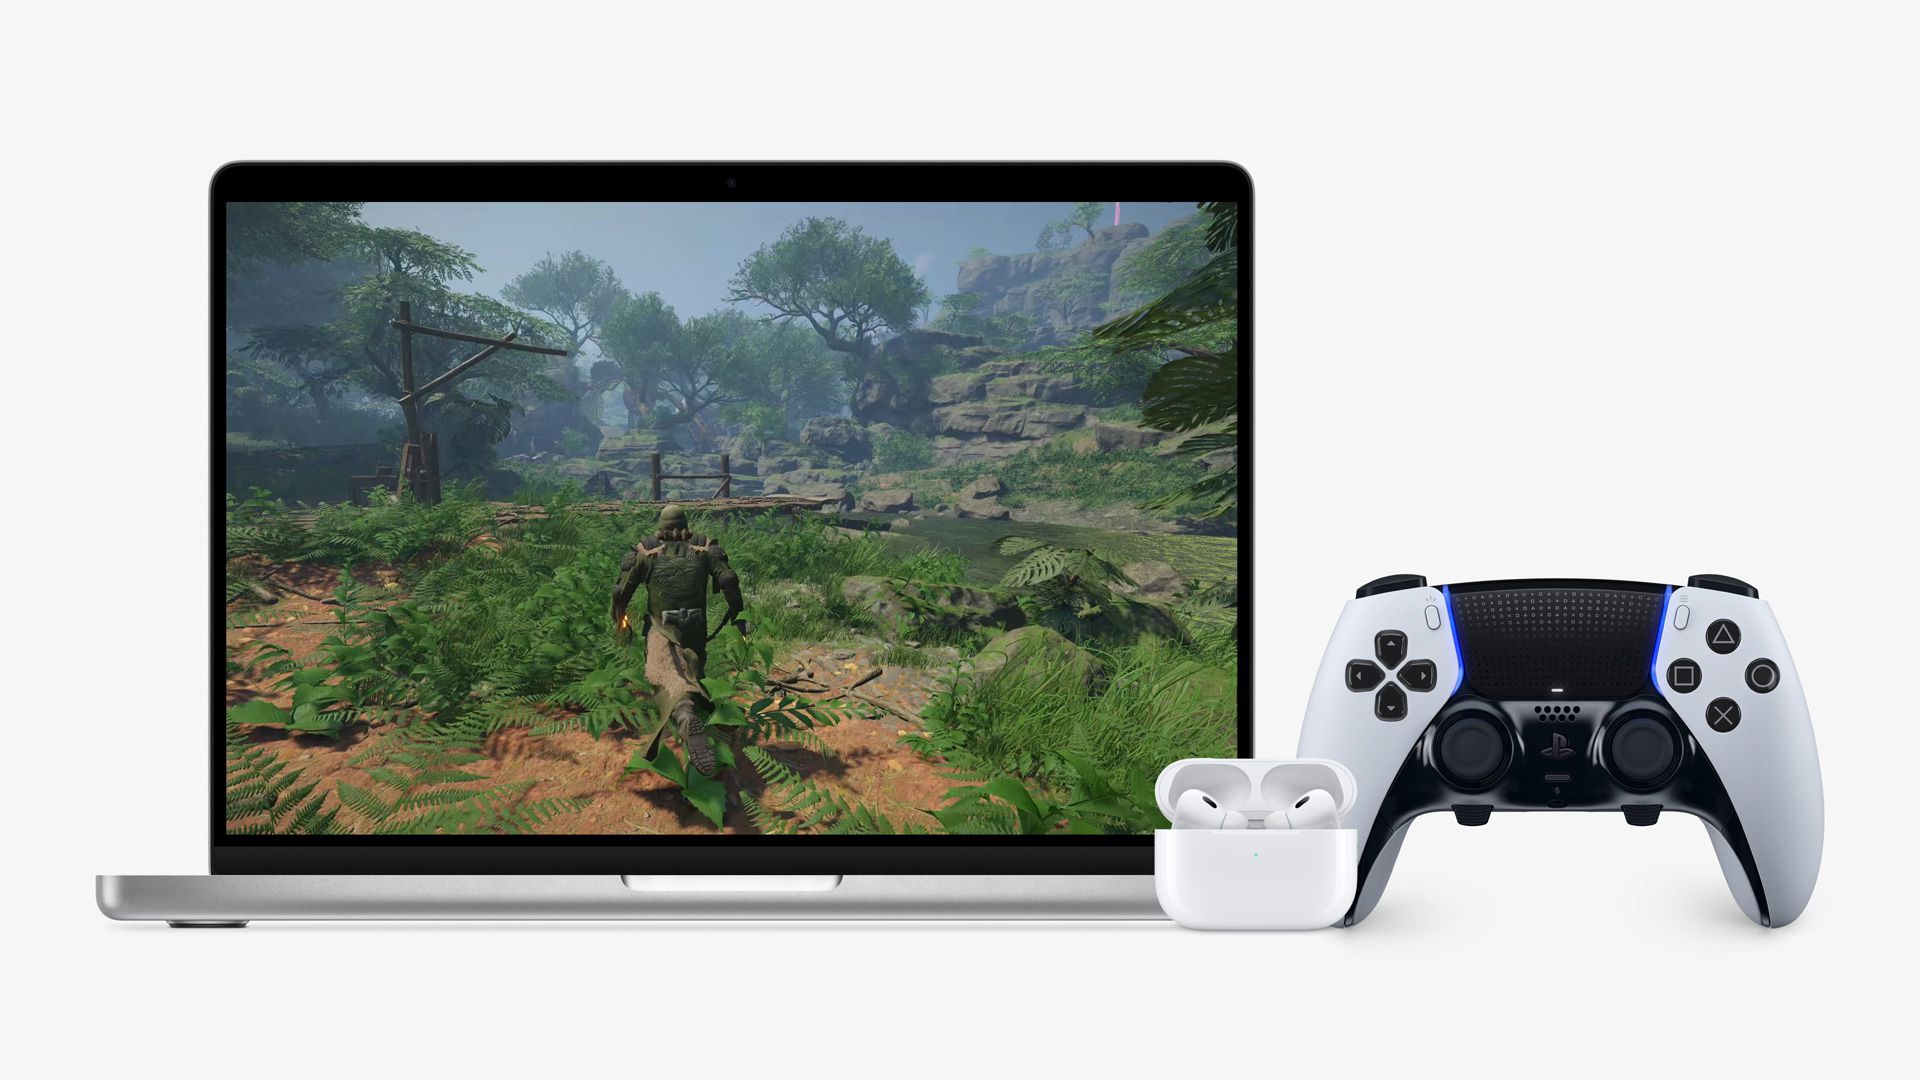 Apple’s event next week will likely focus on high-end gaming on the Mac